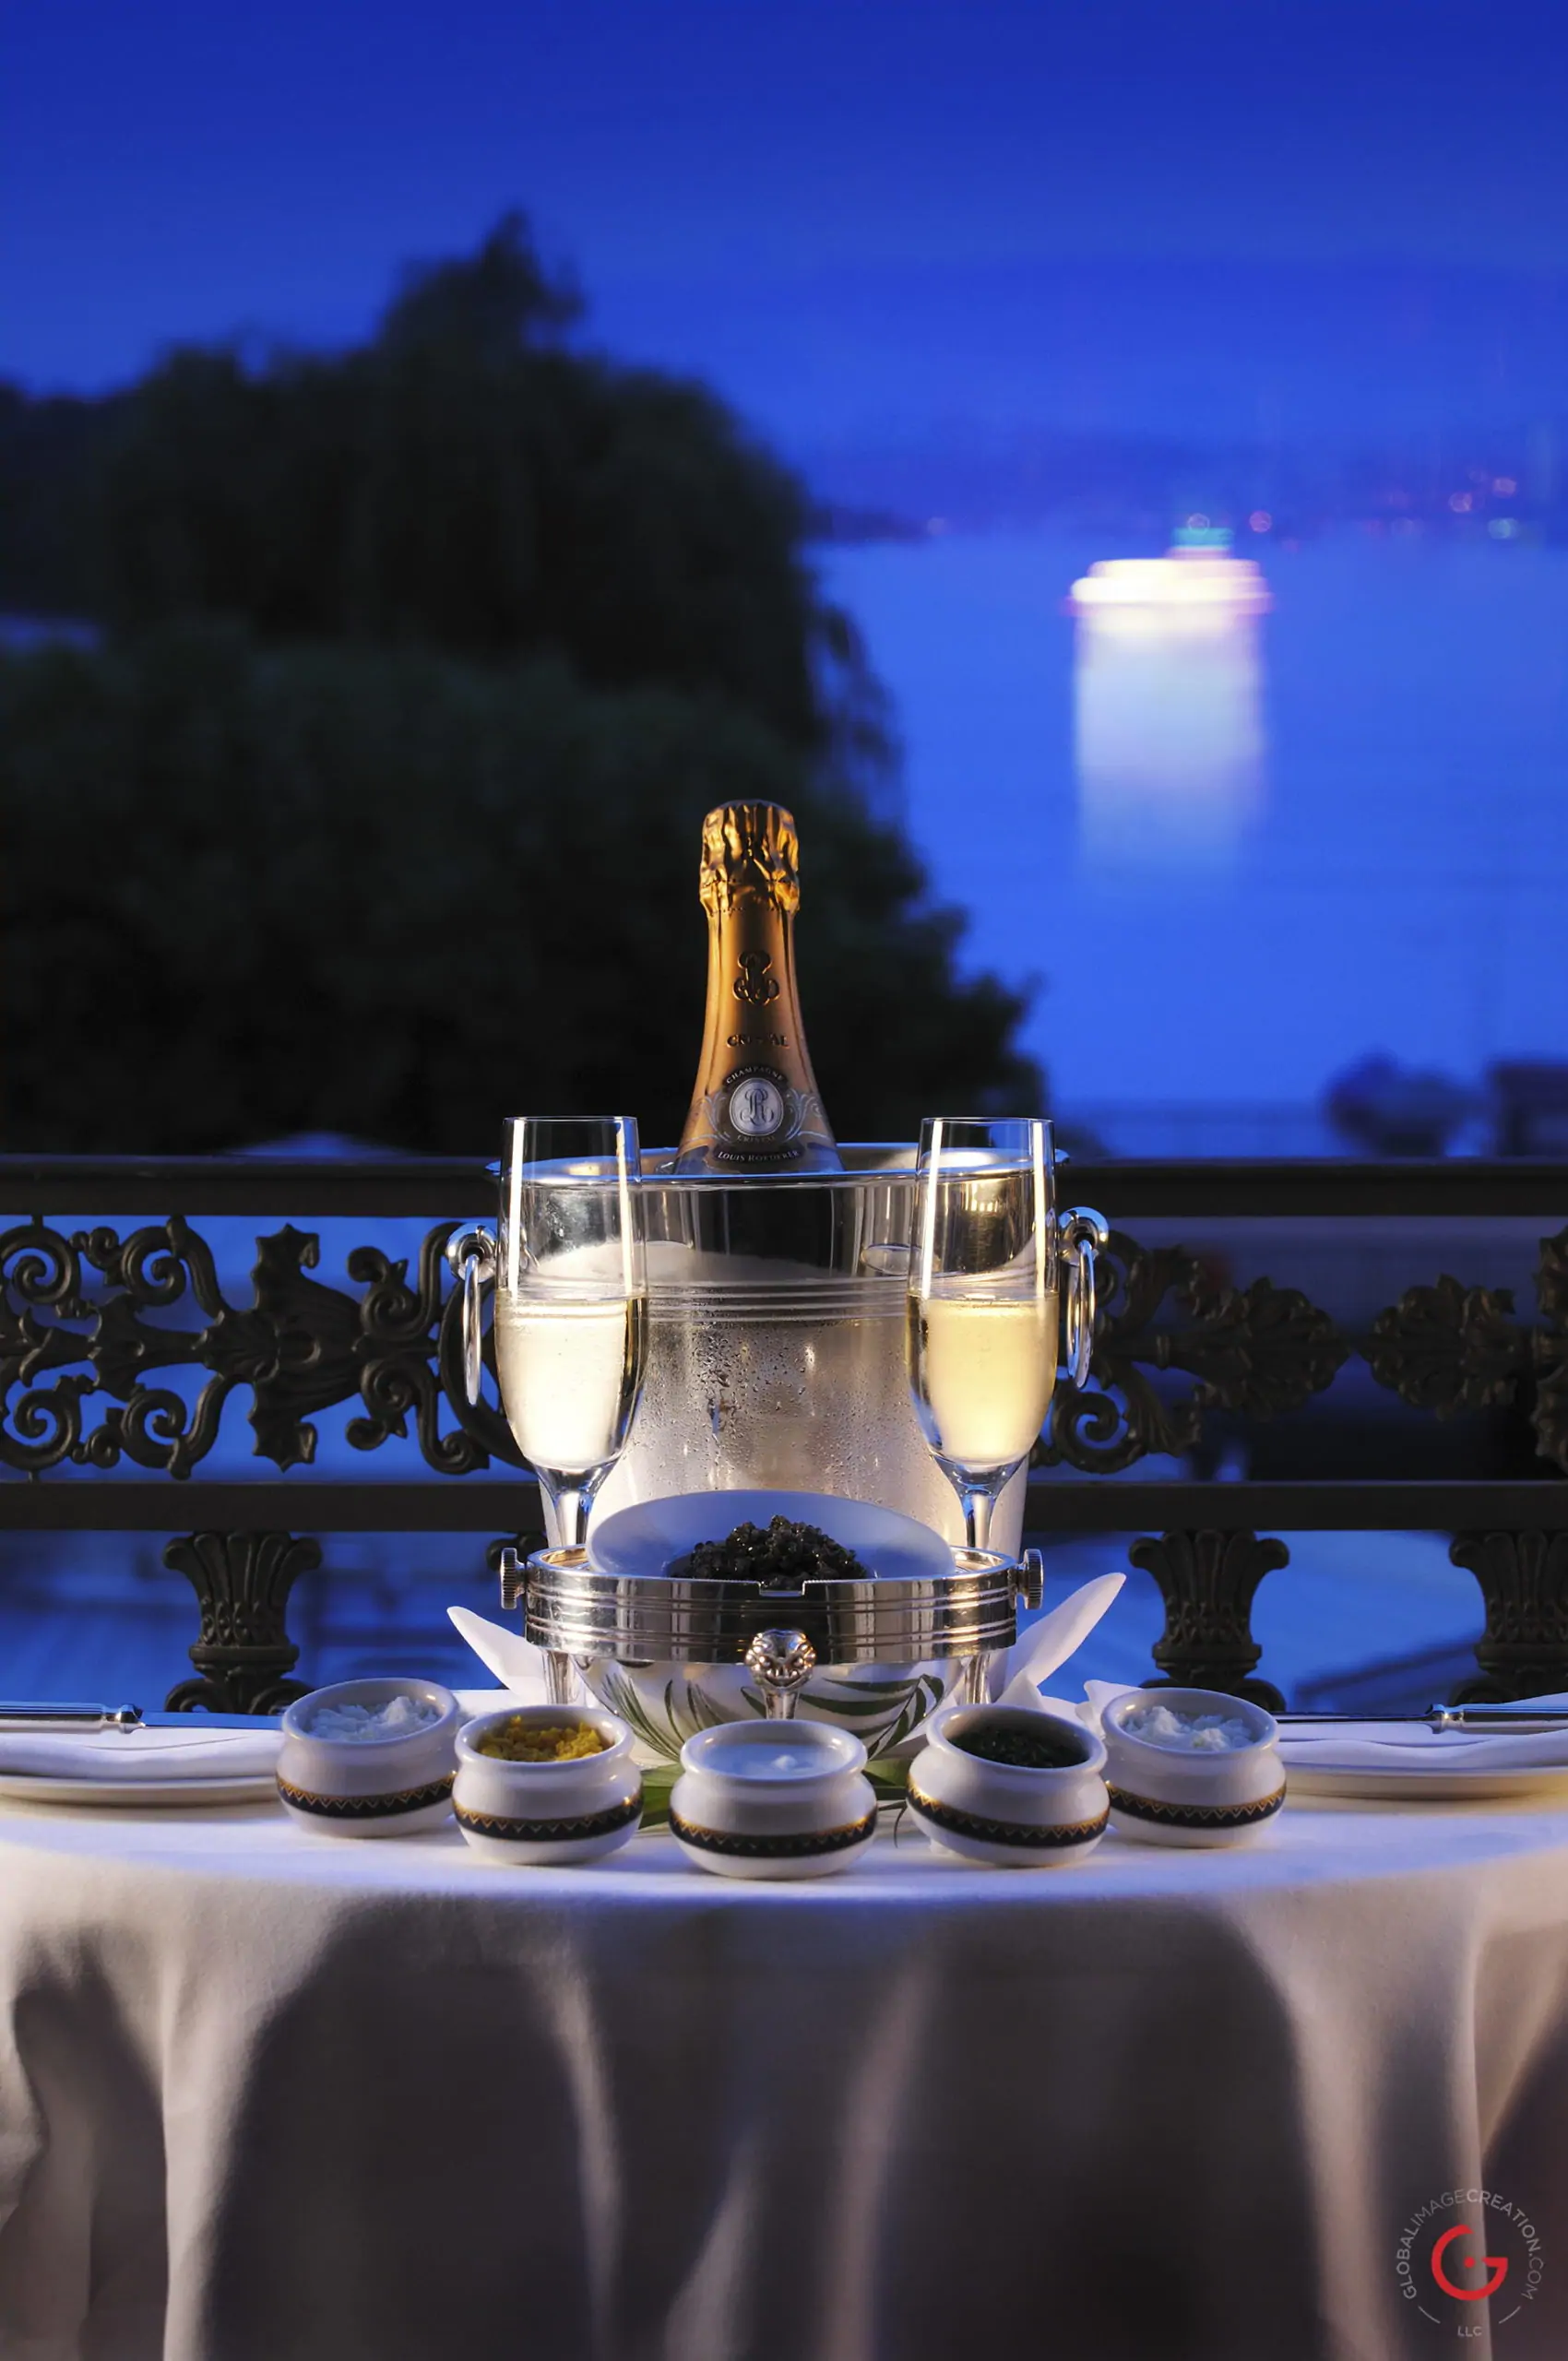 Hotel Life With Champagne and Caviar - Luxury Lifestyle Photographer - Professional Food Photography, Culinary Photographer, Restaurant Photos